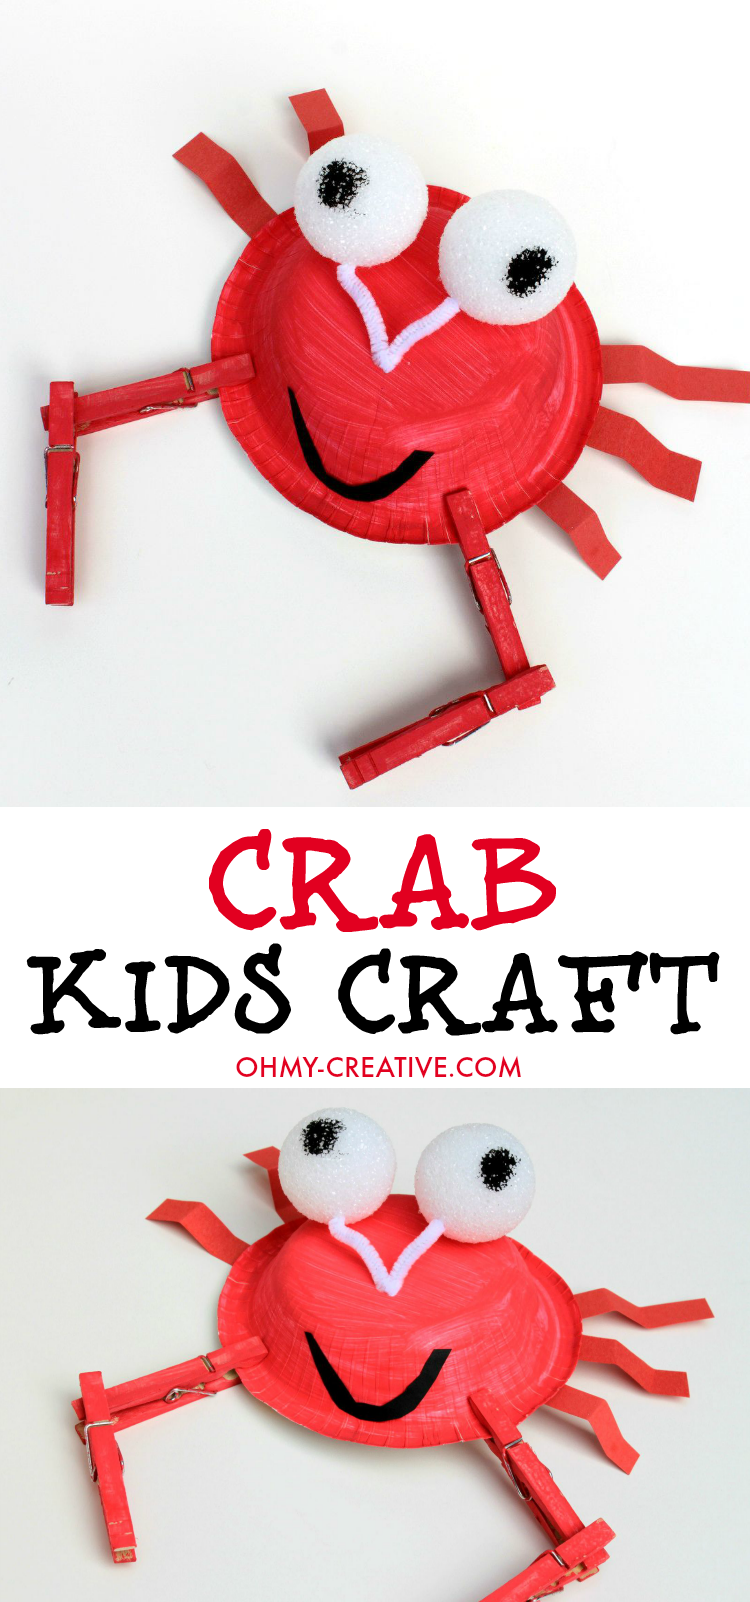 This Easy Paper Plate Crab Kids Craft is adorable for kids to make. Perfect for a summer craft on a hot afternoon, on vacation at the beach or in the classroom. Great under the sea party activity too! |  OHMY-CREATIVE.COM